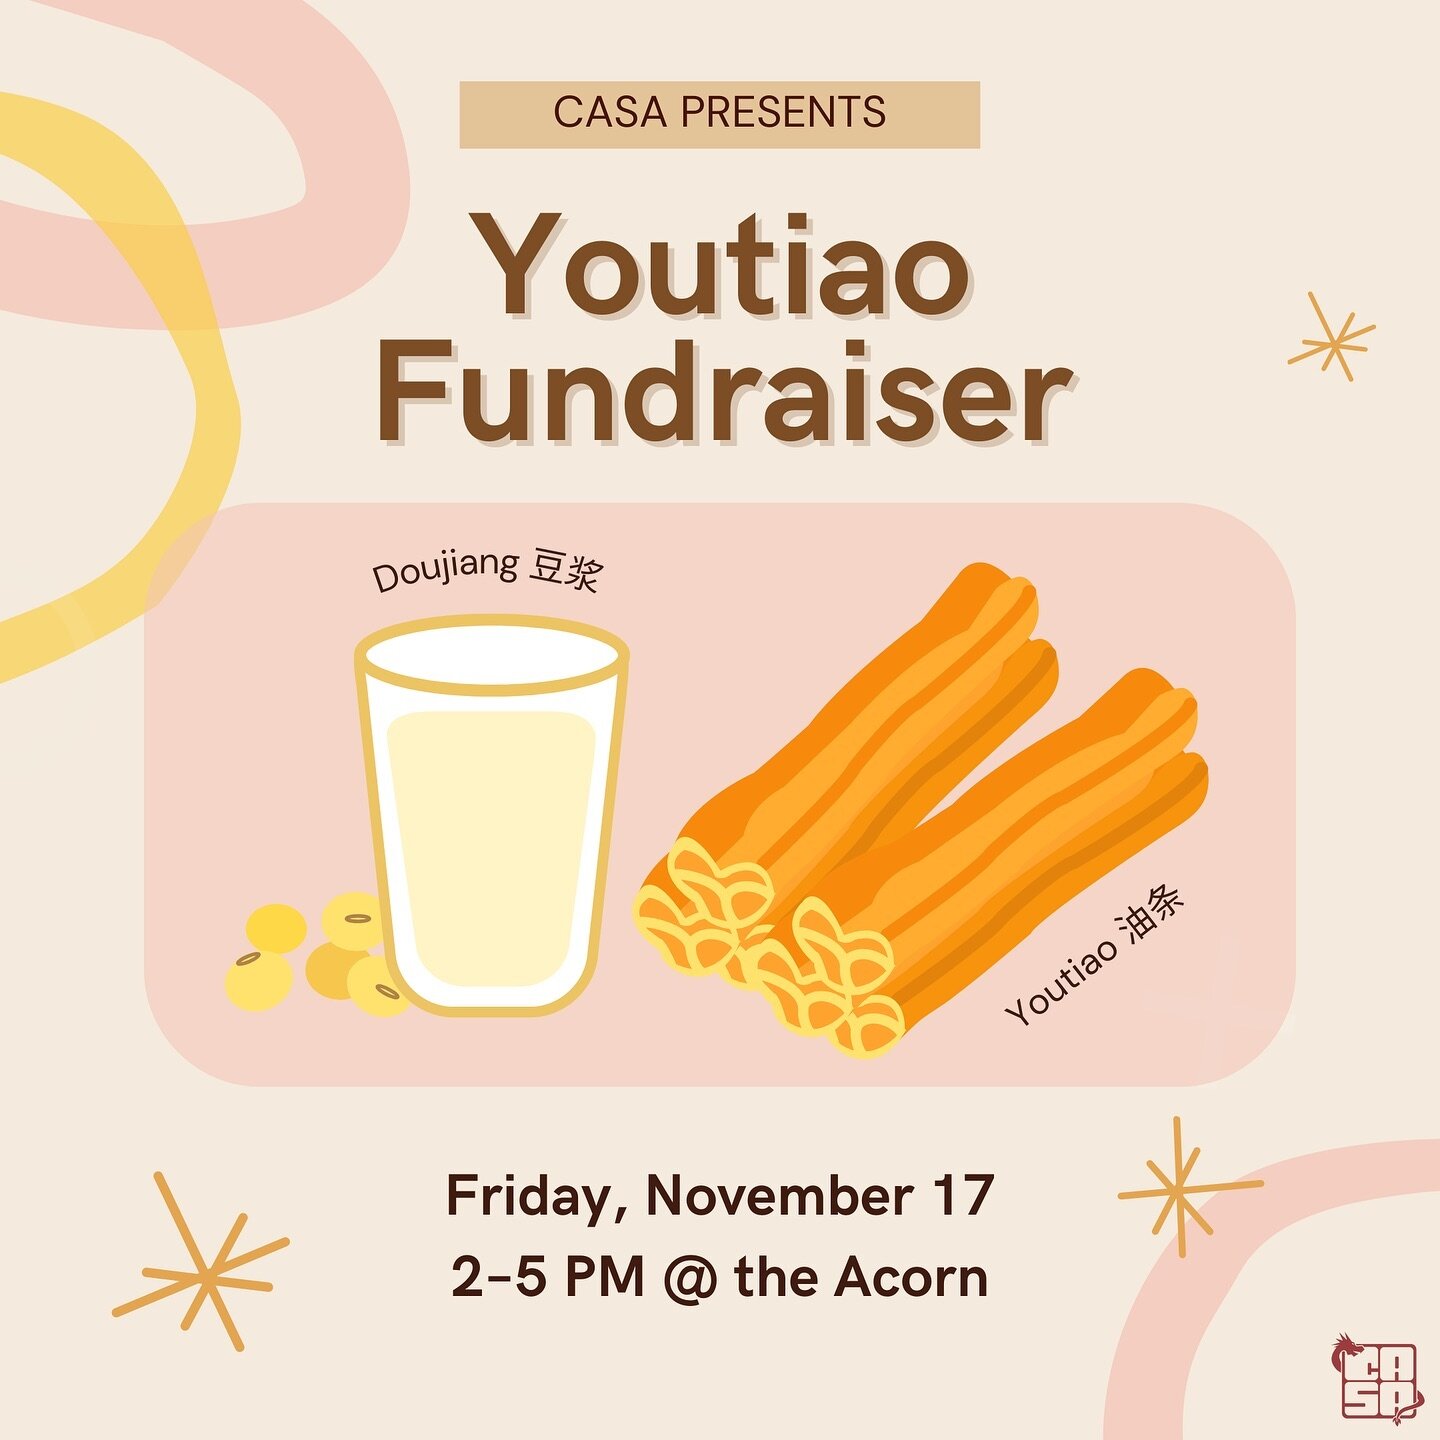 OUR YOUTIAO &amp; DOUJIANG FUNDRAISER IS BACK!!! 🥖🥛

CASA is hosting a Youtiao Fundraiser on Friday, 11/17 from 2&ndash;5 PM at the Acorn Caf&eacute; at Silliman in hopes of lowering merch prices! ☕️ Come for tasty youtiao 油条 (crispy fried dough st